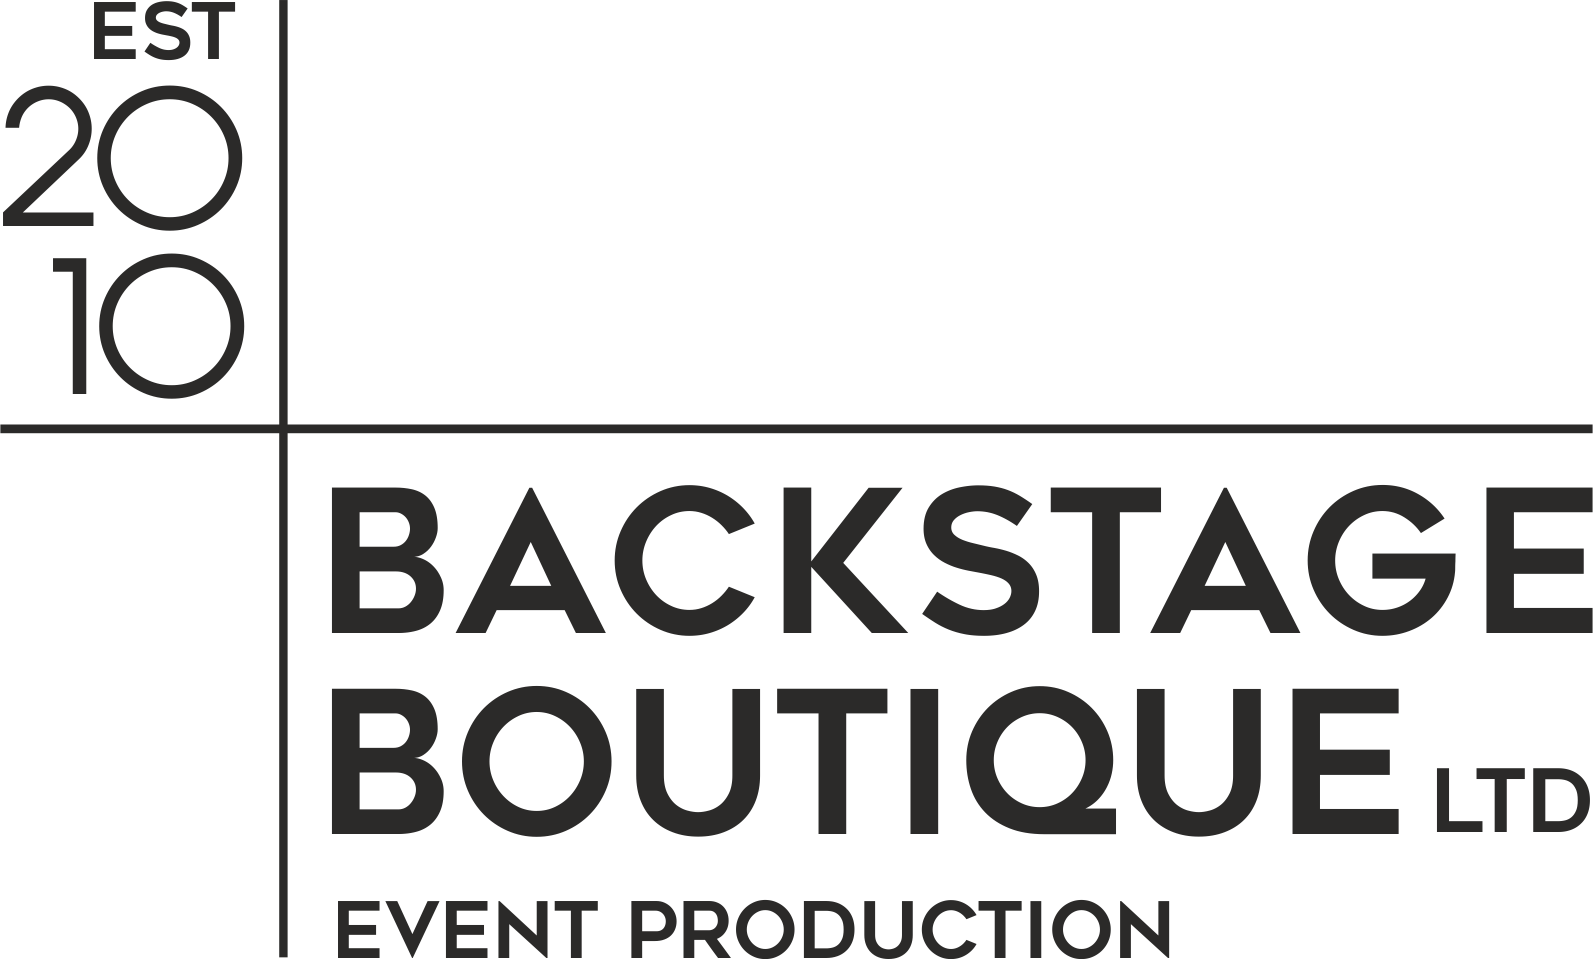 Backstage Boutique Ltd Have Interconnected Bespoke - Visual Merchandising (1593x959)